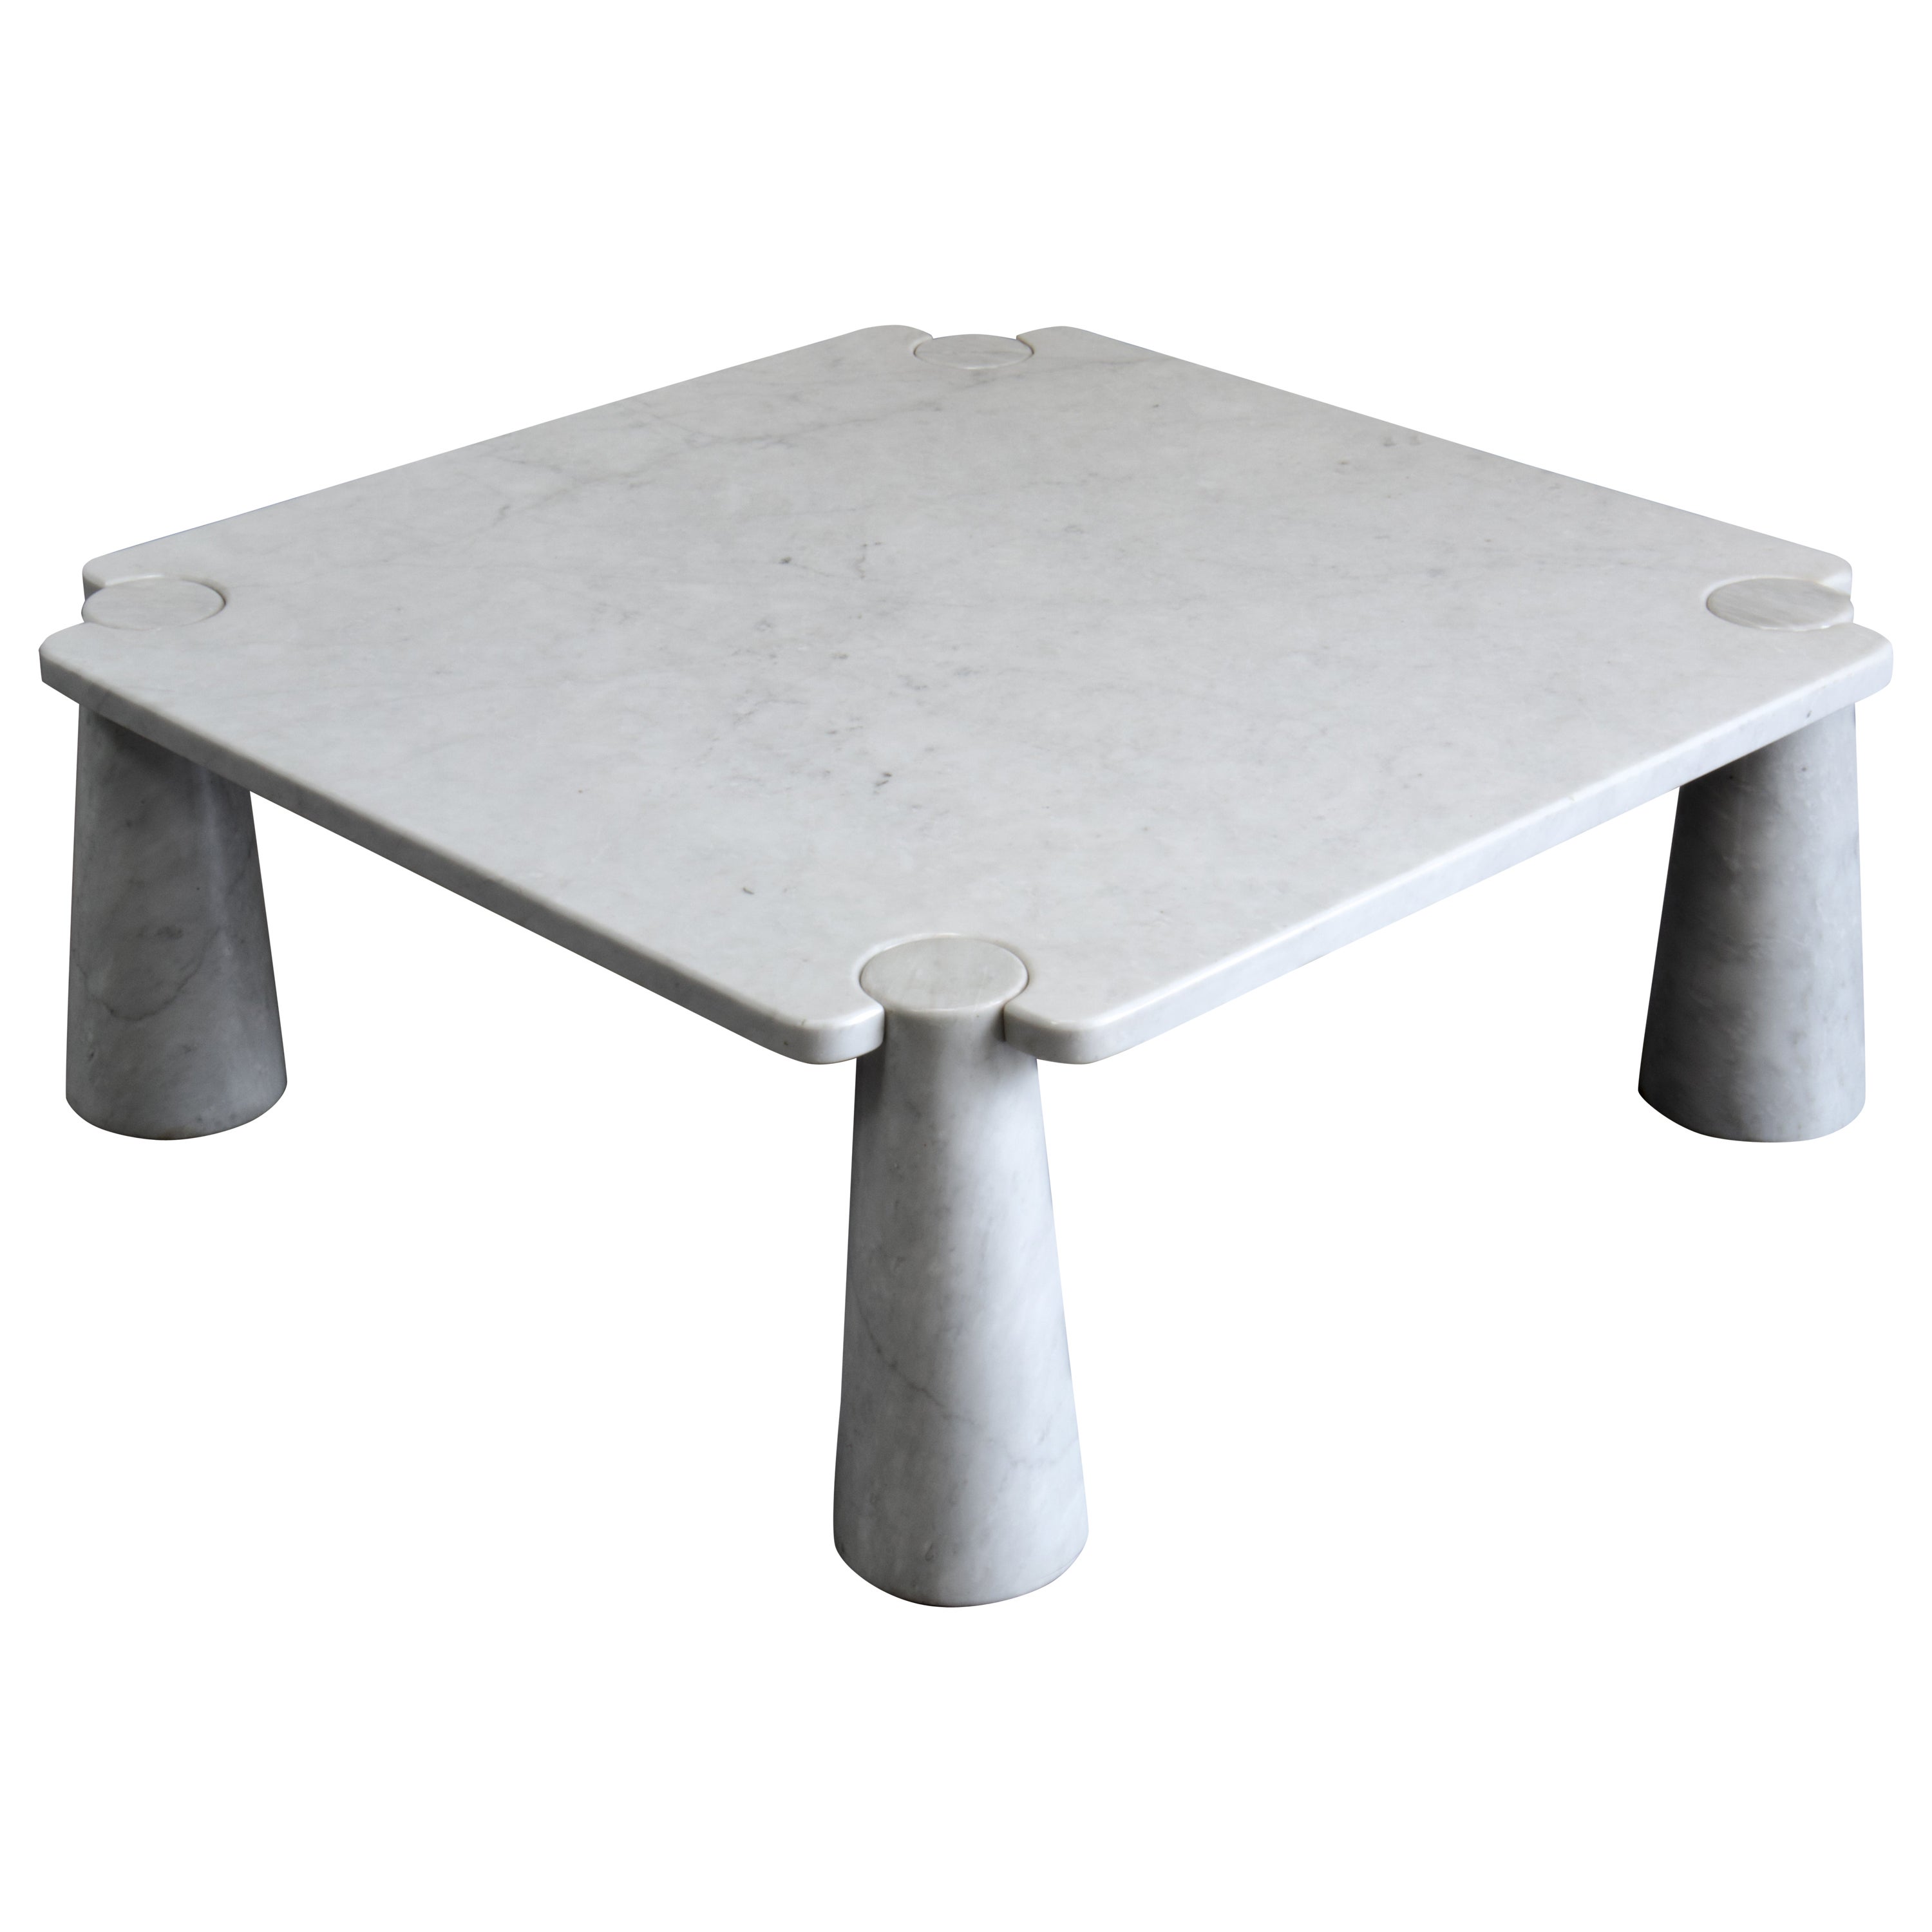 Mangiarotti Eros Coffee Table in Carrara Marble for Skipper, 1970s Italy For Sale